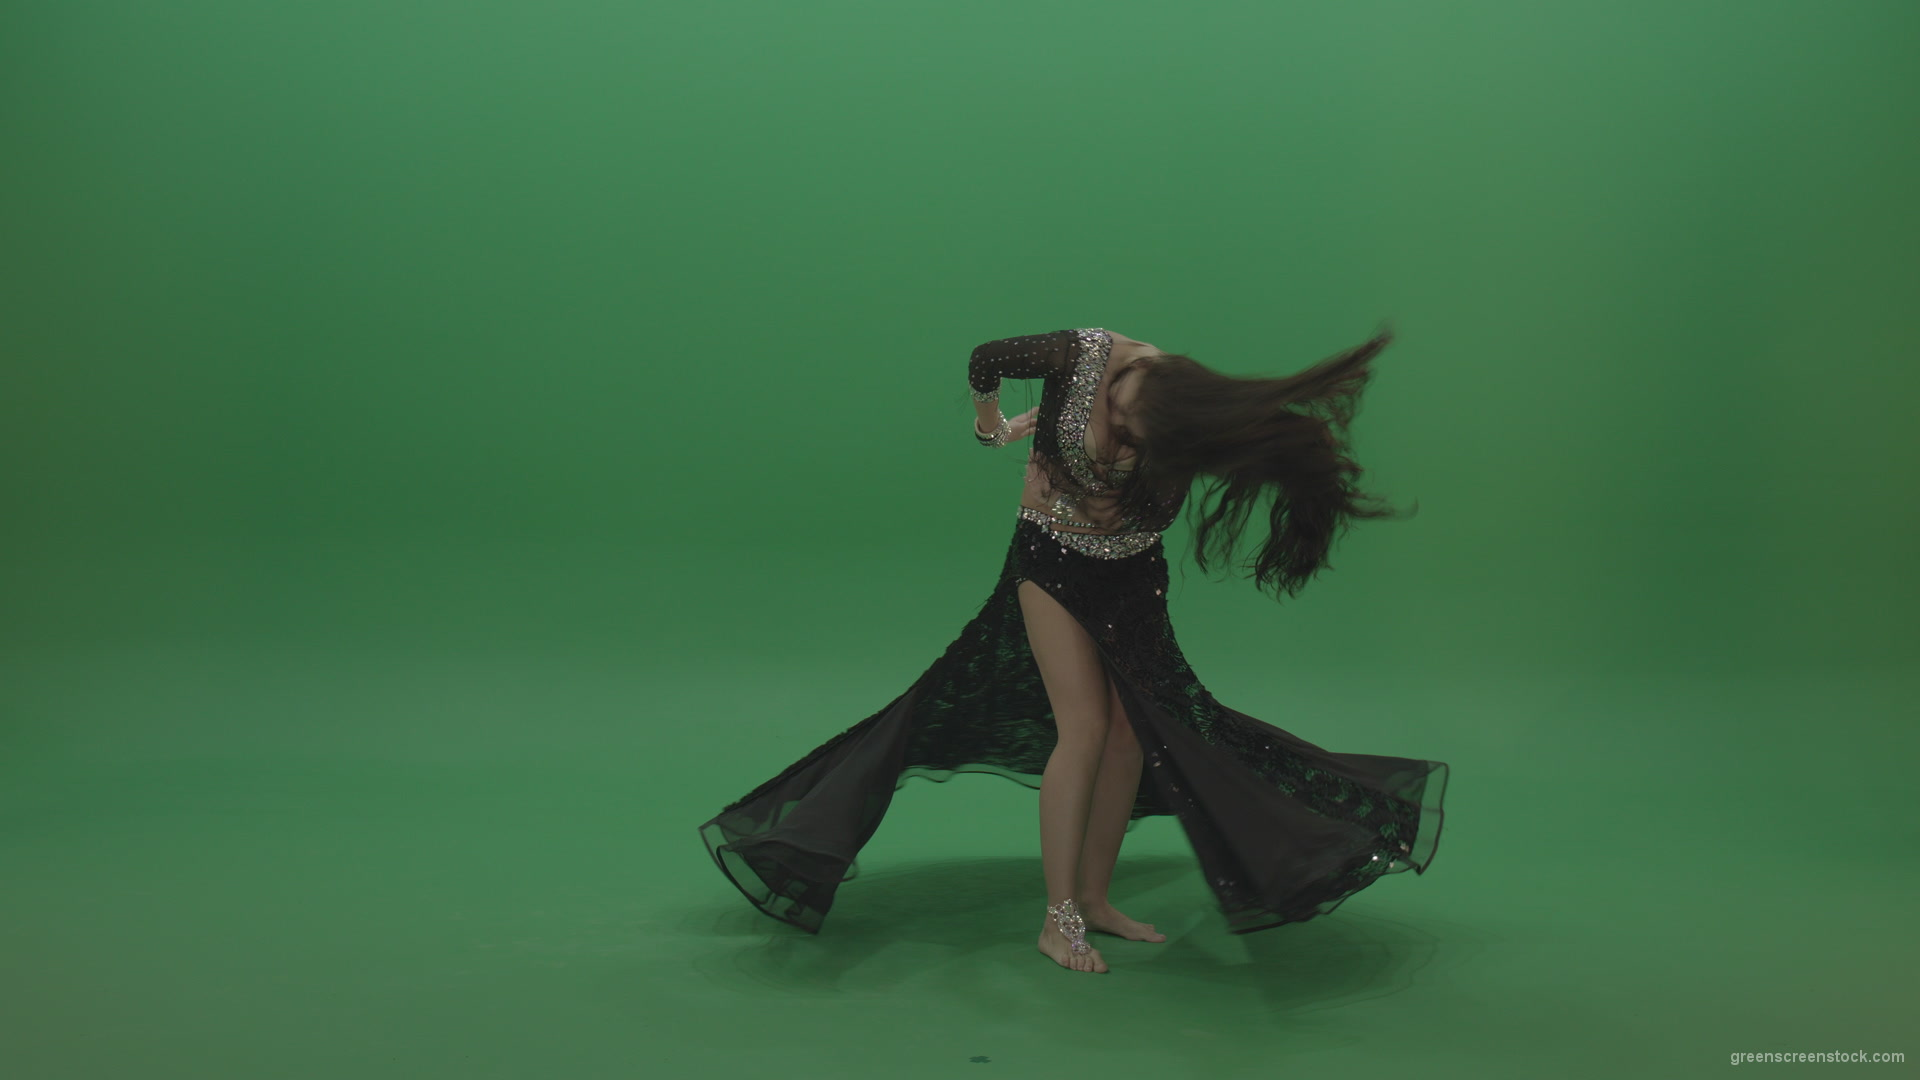 Appealing-belly-dancer-in-black-wear-display-amazing-dance-moves-over-chromakey-background_007 Green Screen Stock